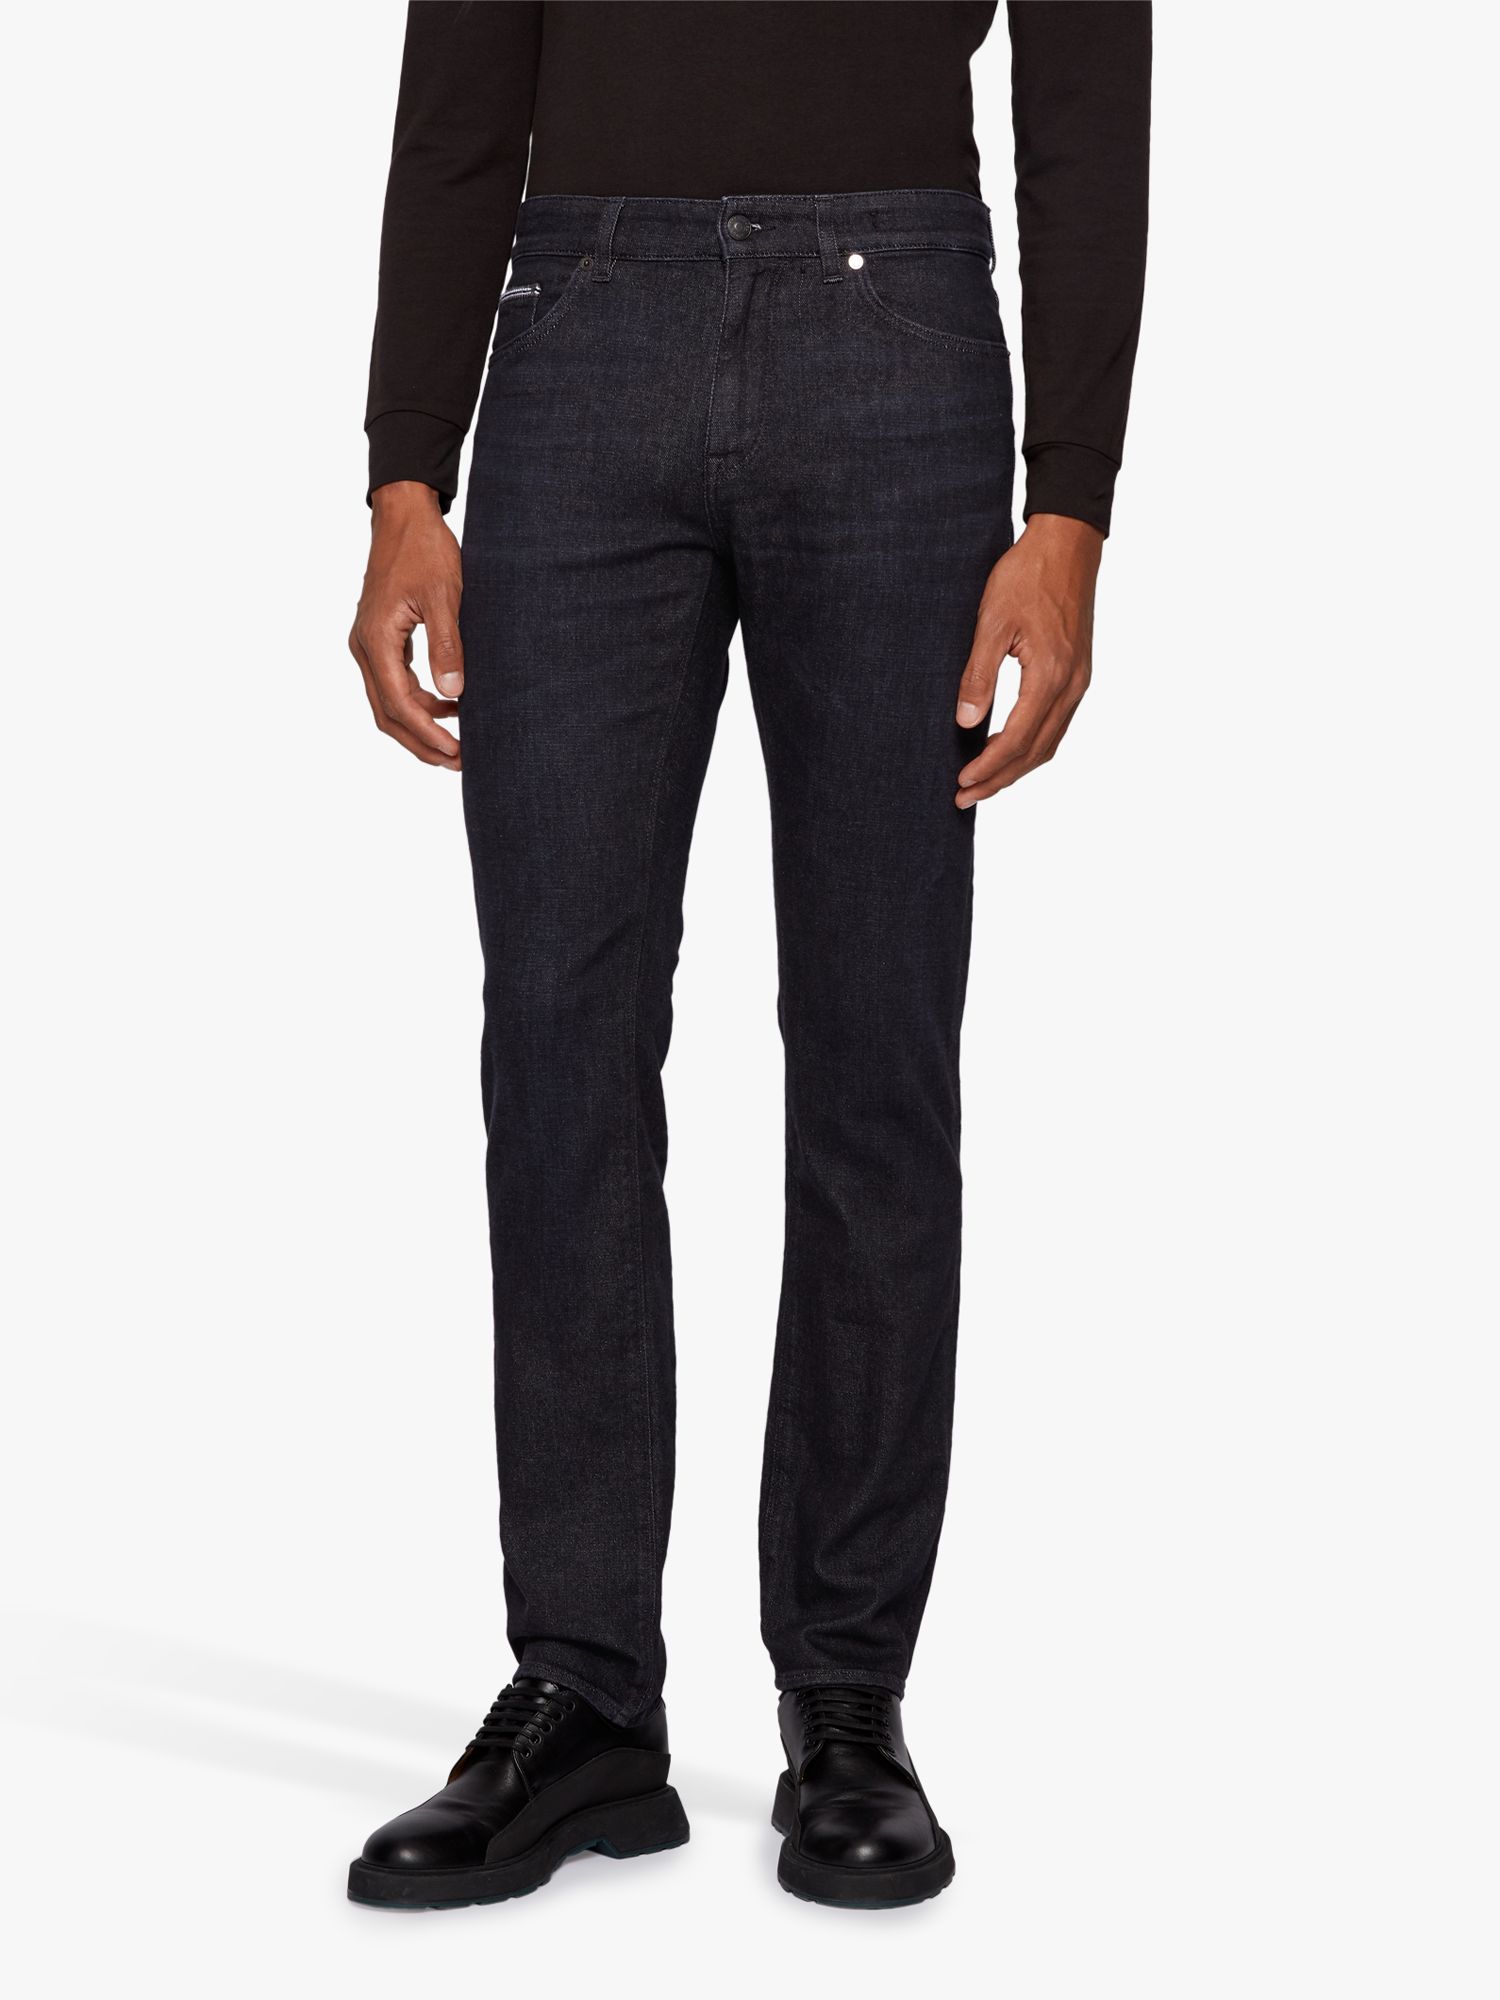 BOSS Maine Stretch Jeans, Black at John Lewis & Partners